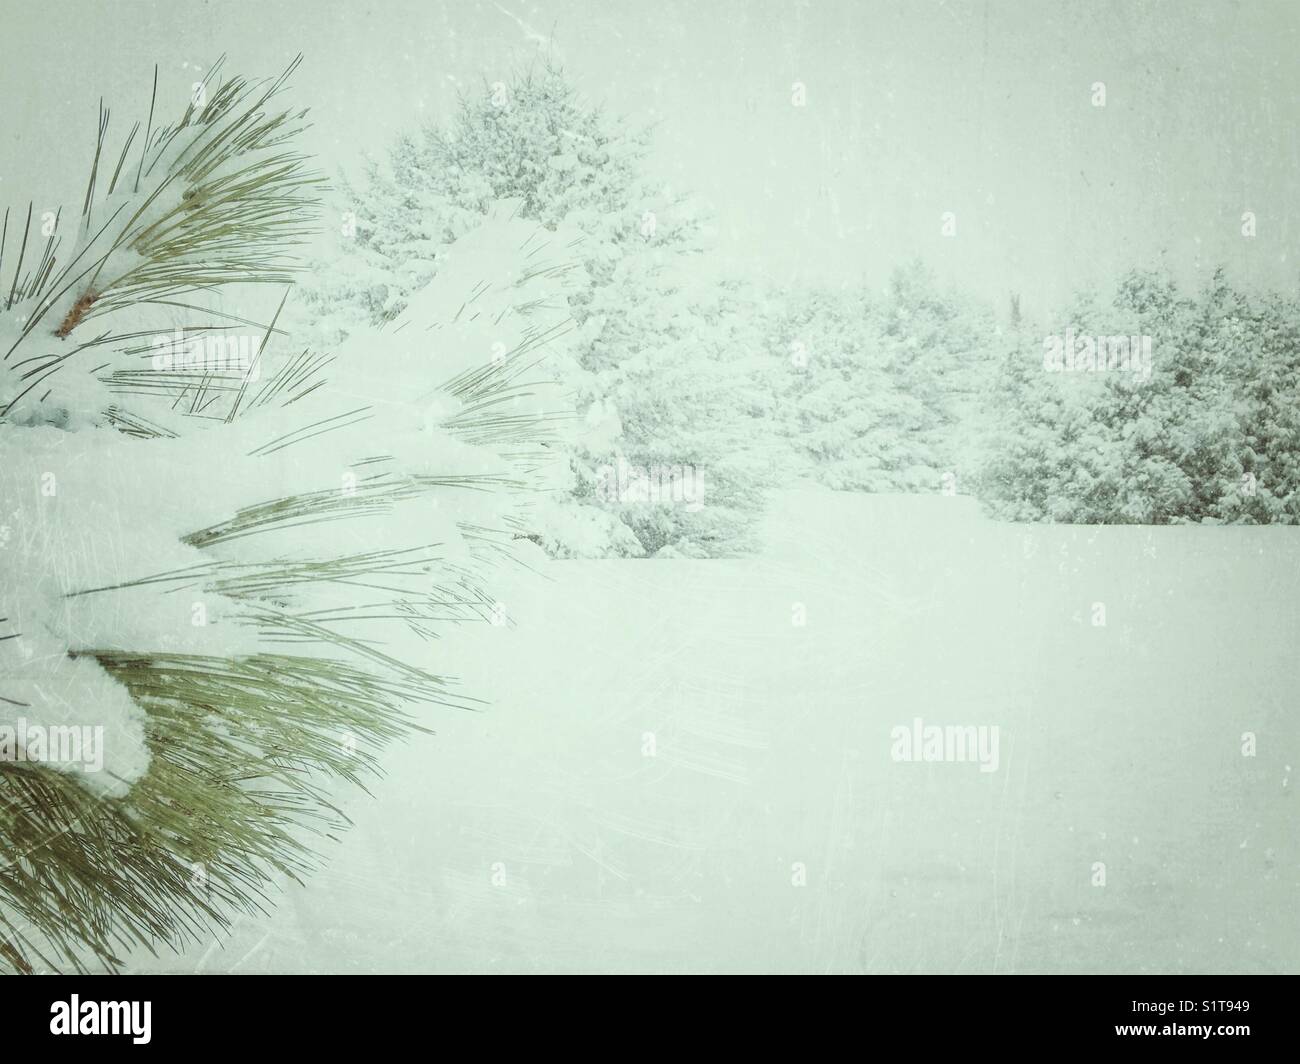 Snowy scene with snow covered pine needles in foreground and snow covered ground, cedar trees and other evergreen trees in background Stock Photo